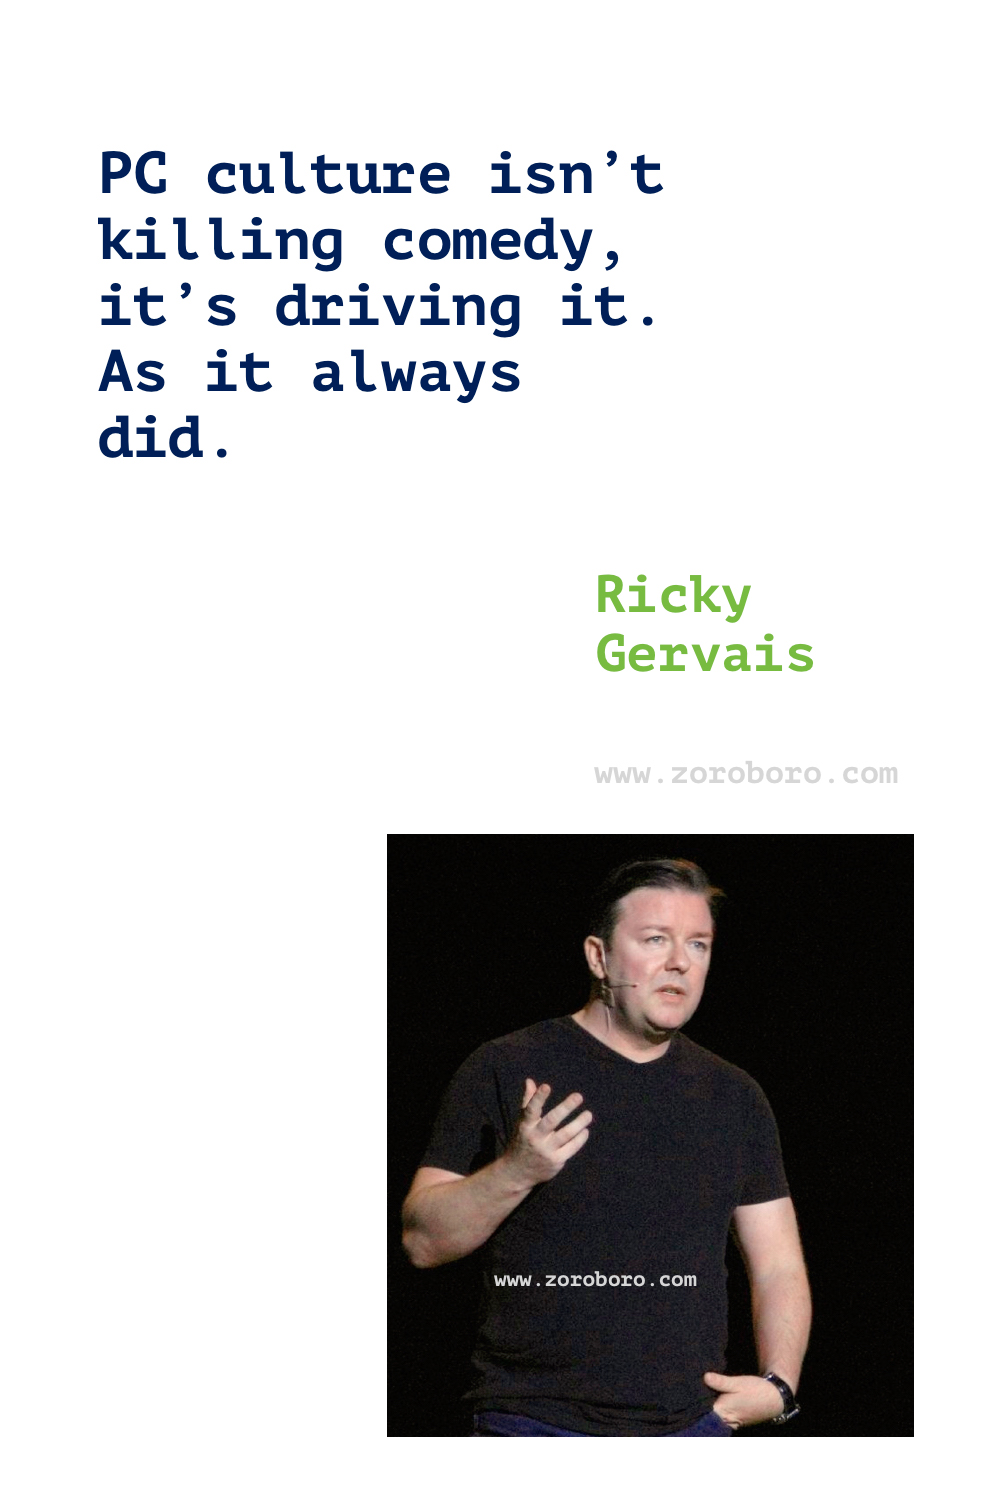 Ricky Gervais Quotes, Ricky Gervais on Religion, Life, Atheism, Death & Science. Ricky Gervais Humor Quotes.Ricky Gervais Humanity & Animals Quotes, Ricky Gervais Quotes. Ricky Gervais